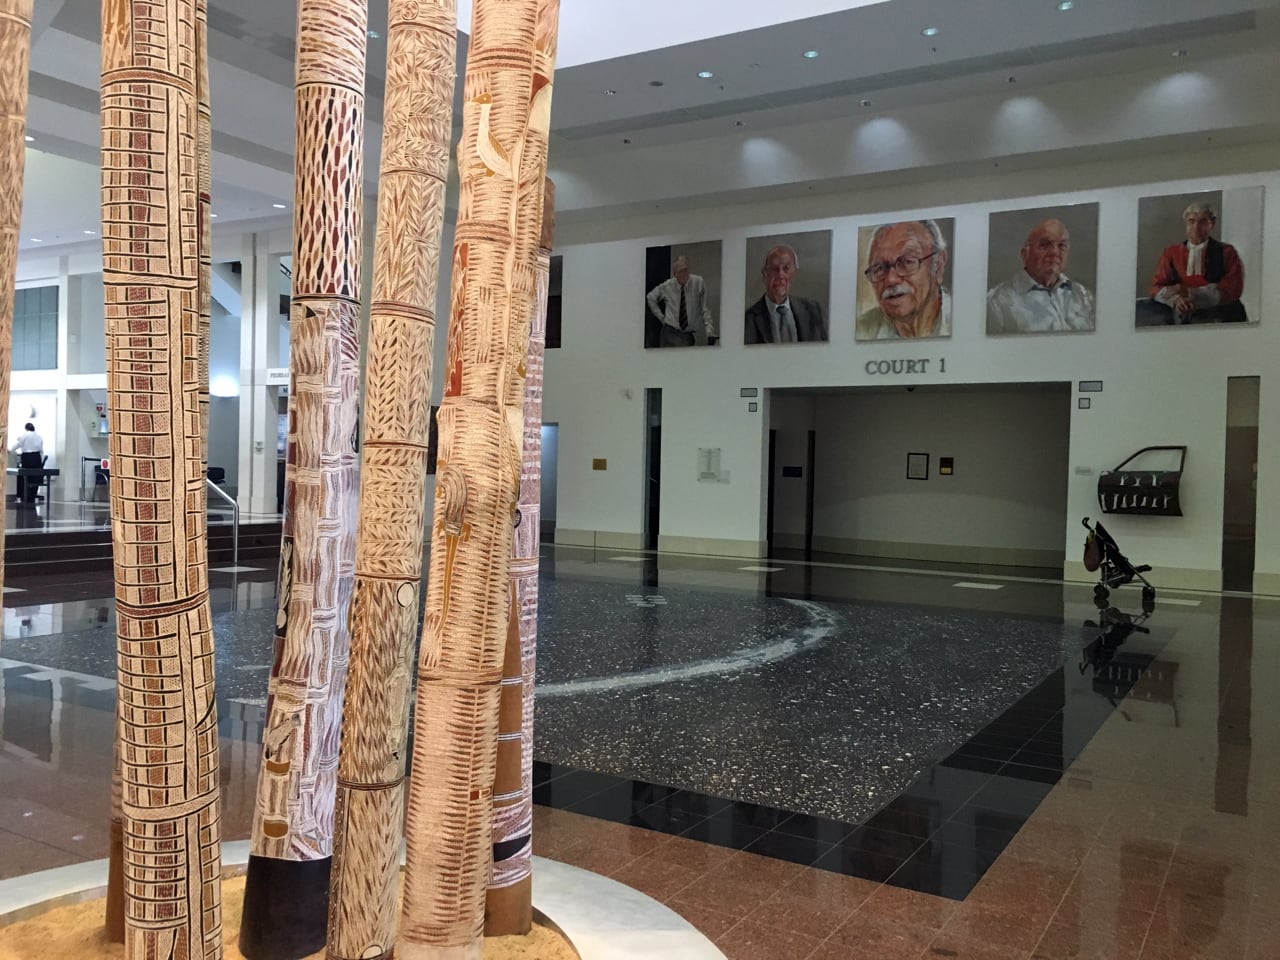 Image 02: View of the central hall at the Supreme Court in Darwin. Visible are portraits by Danielle Bergstrom, poles from a Wukidi ceremony in memory of the Yolŋu man Dhäkiyarr and a Utopia Car Door by Elsie Kemarre. Photo credit: Alana Hunt